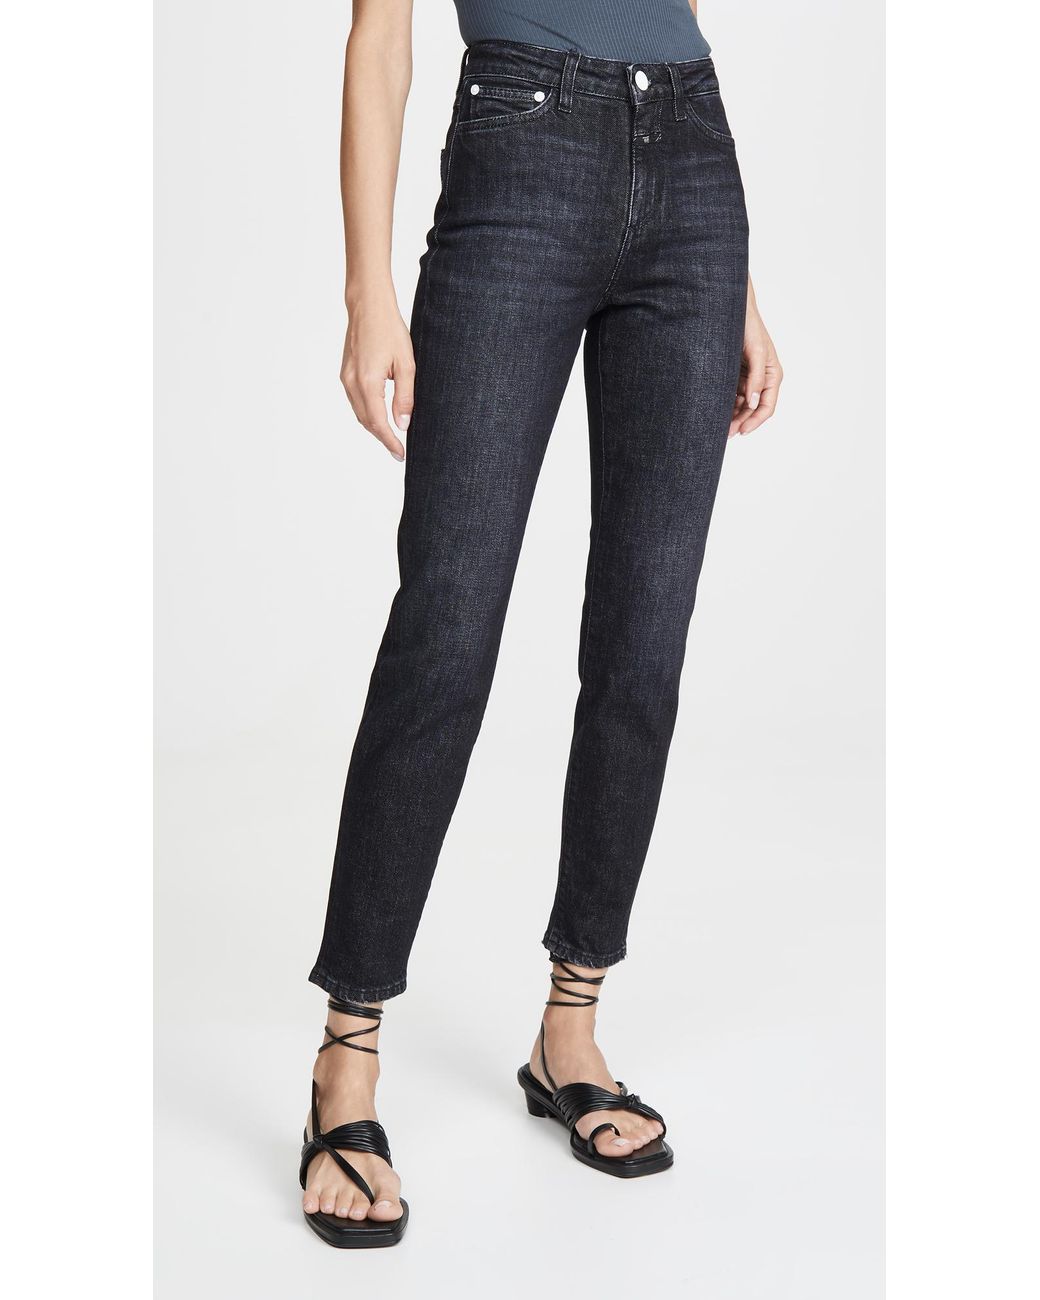 Closed Baker High Jeans in Gray | Lyst